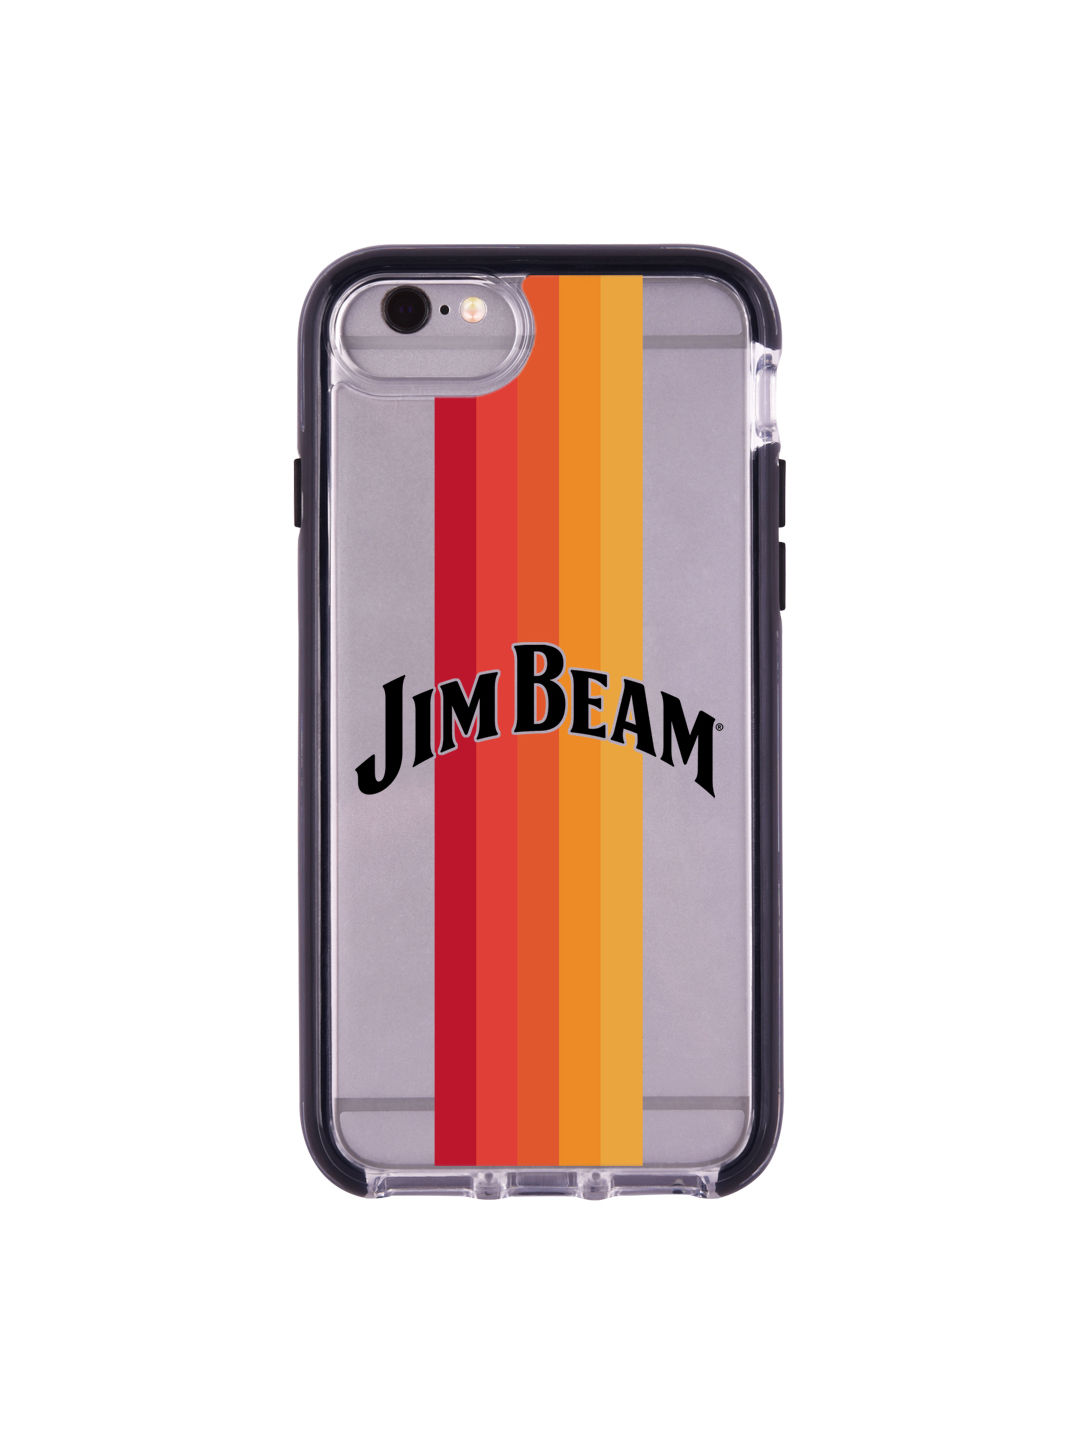 Jim Beam Sun rays Stripes - Shield Case for iPhone 6S